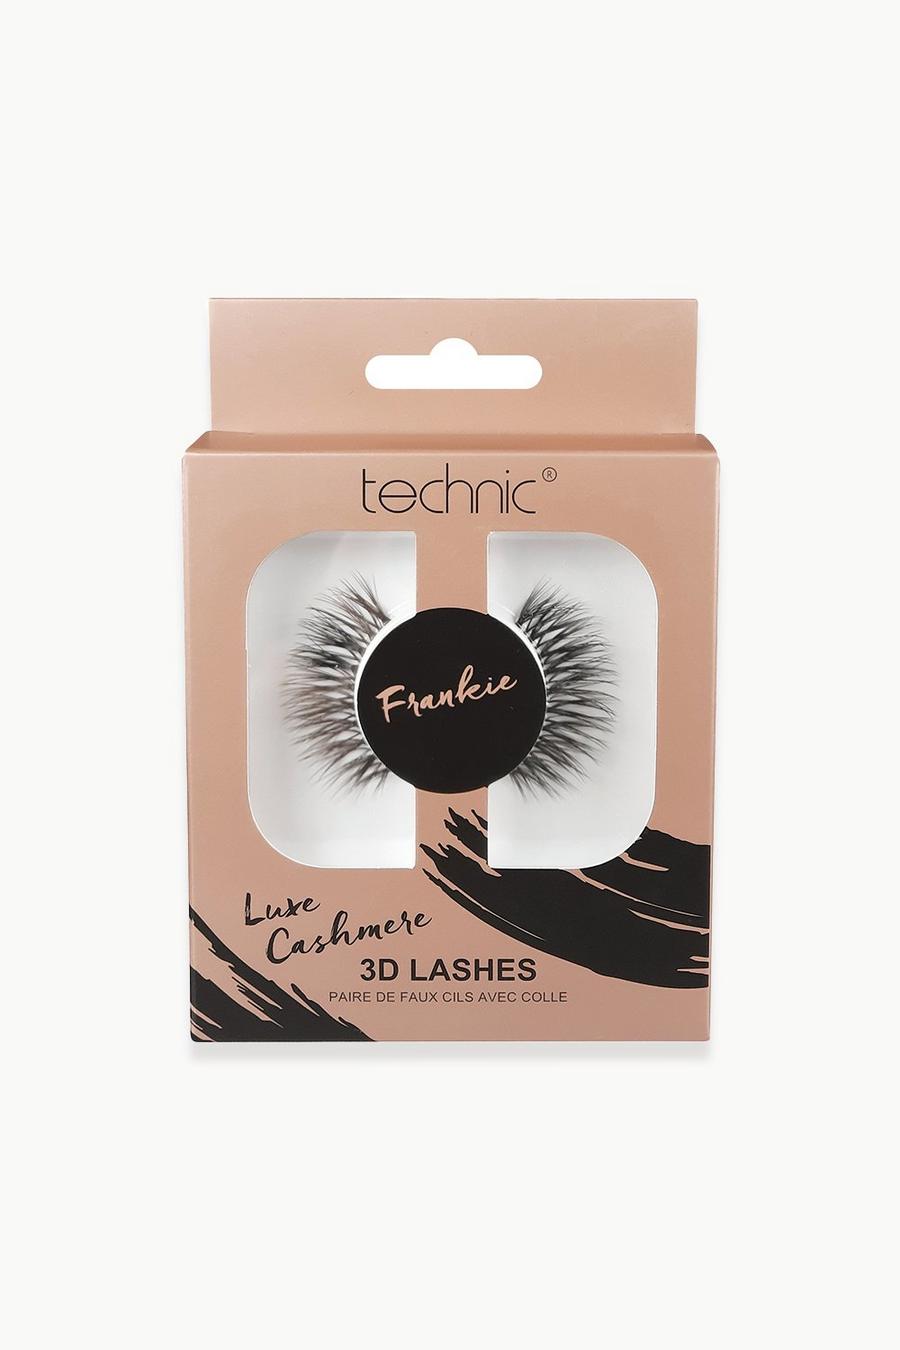 Technic Luxe Cashmere Wimpern - Frankie, Black